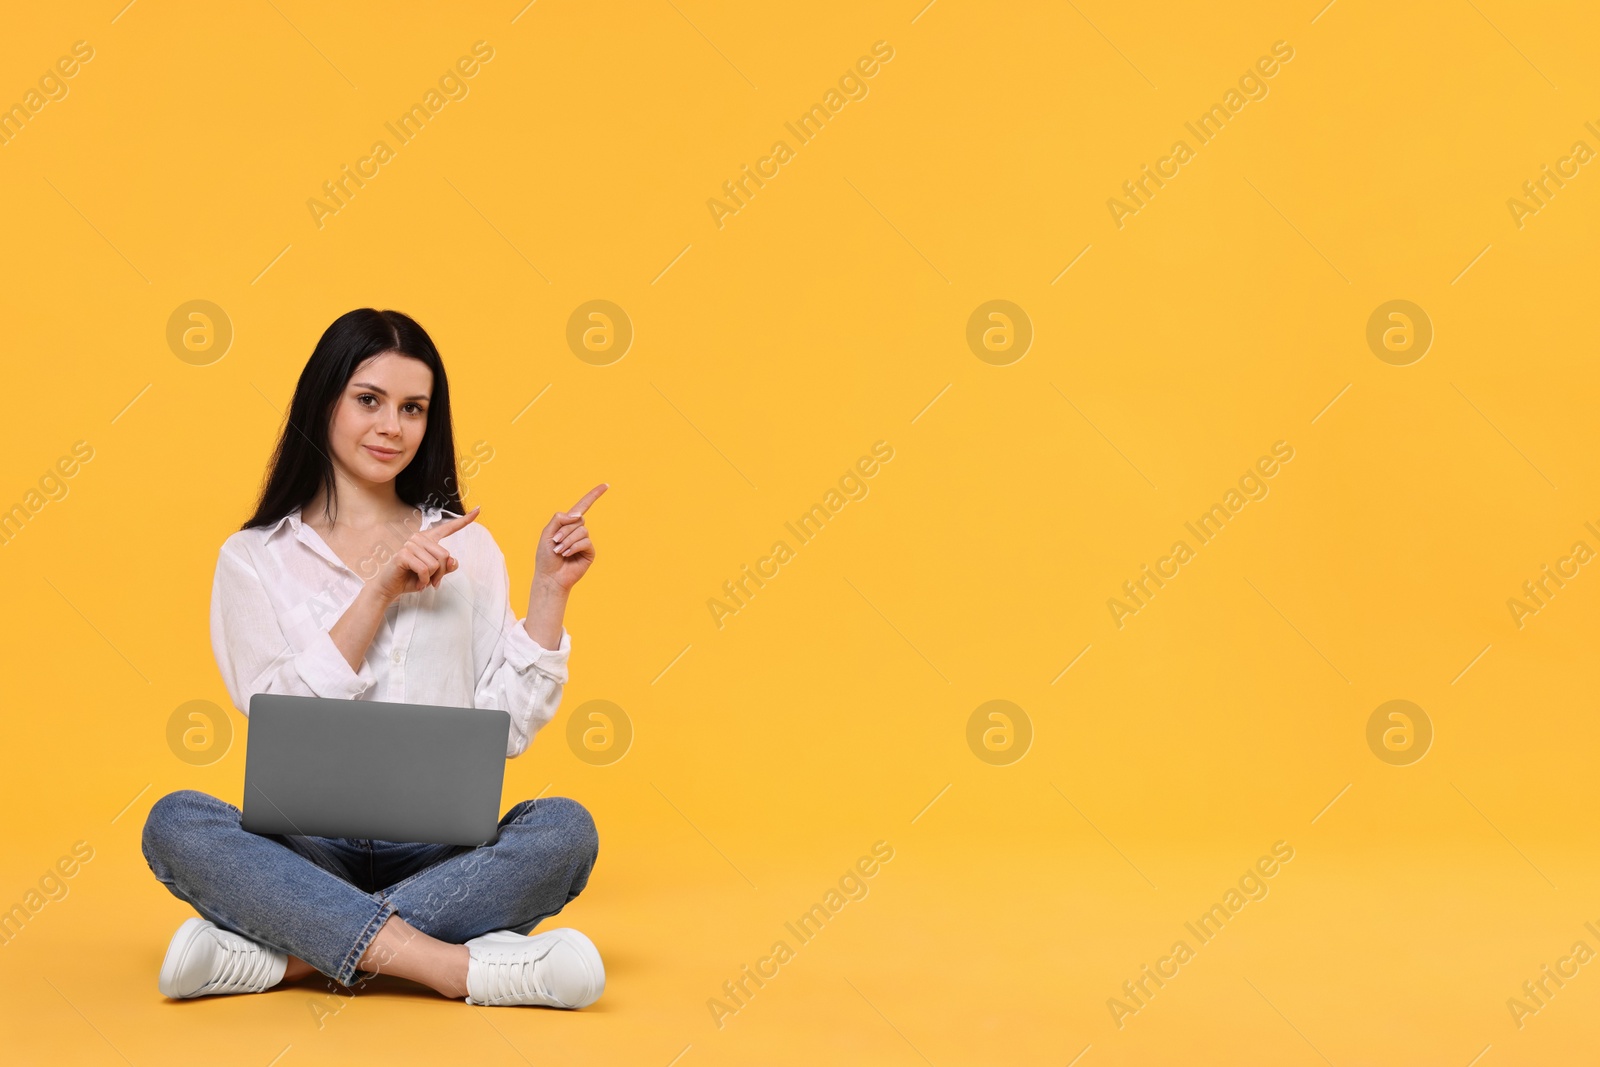 Photo of Student with laptop sitting and pointing at something on yellow background. Space for text